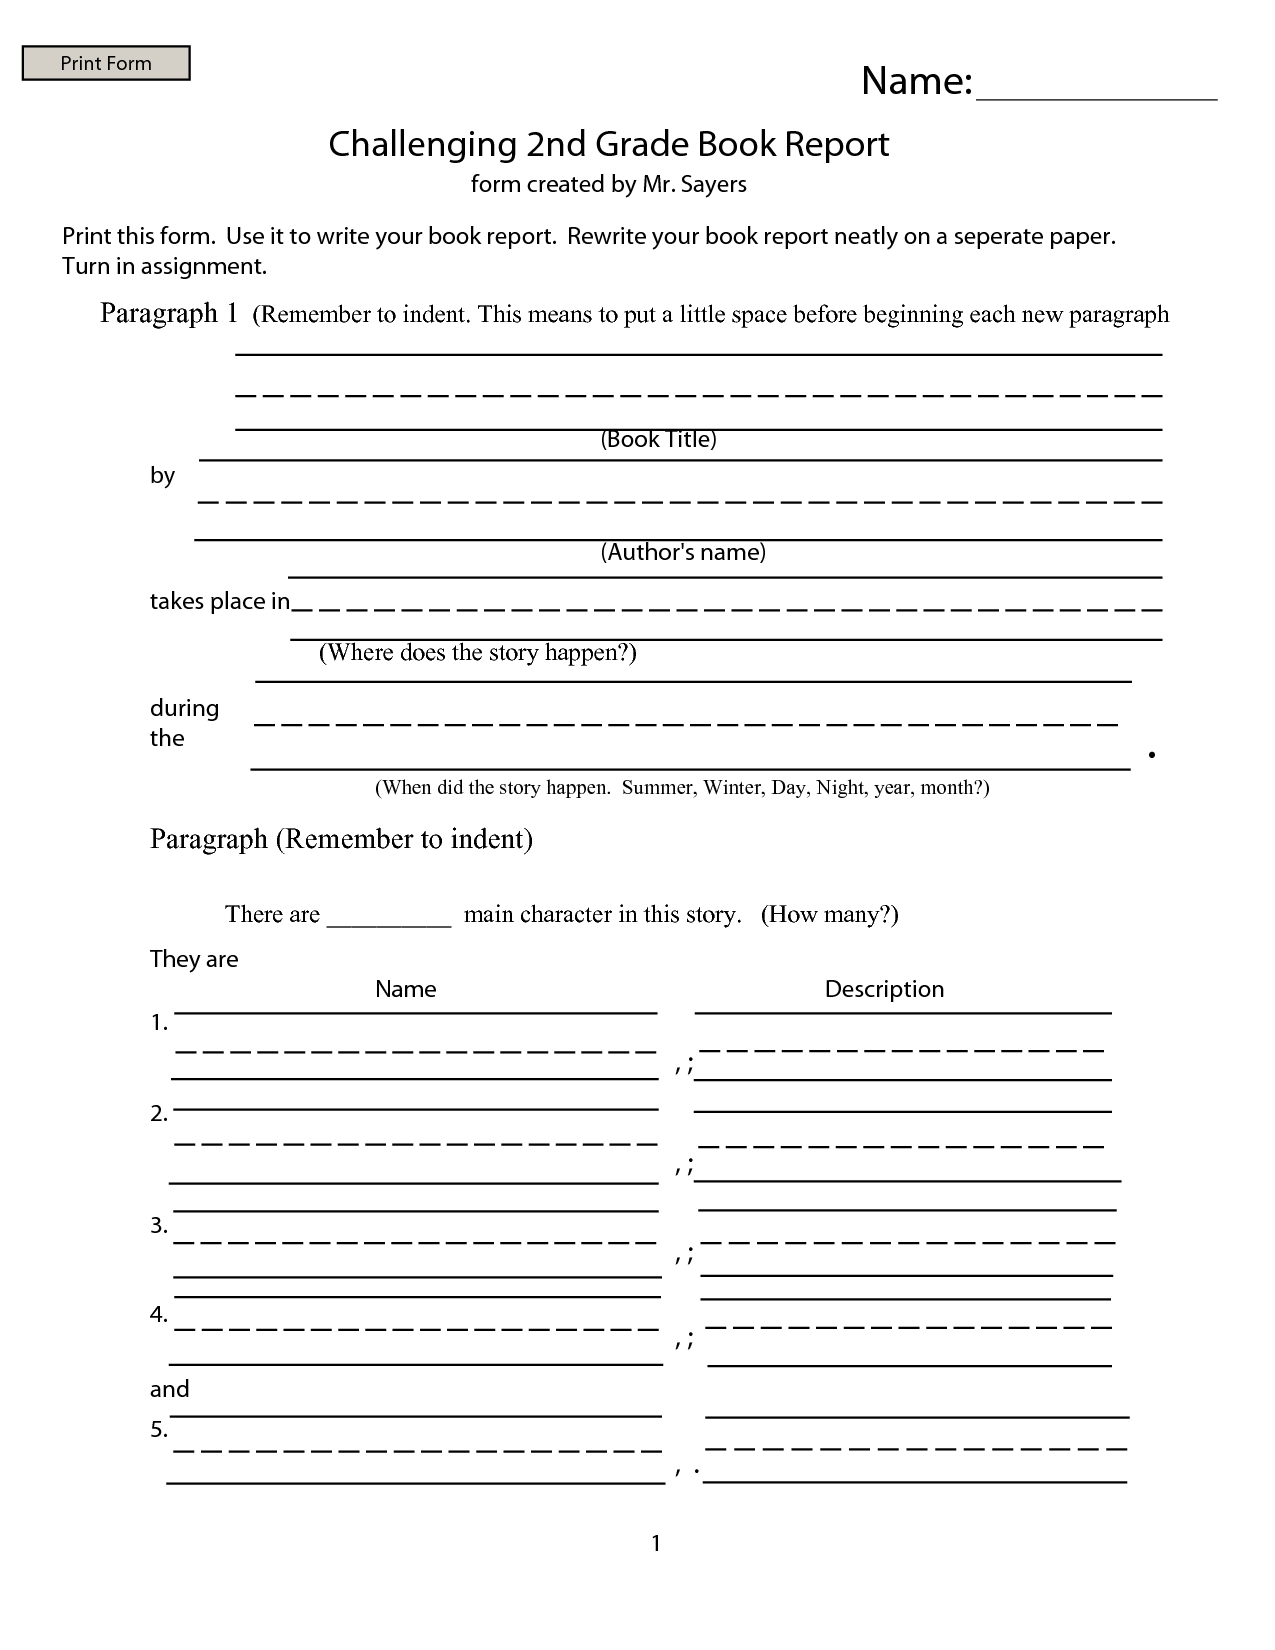 2Nd Grade Book Report – Google Search | Abc123 Throughout Book Report Template 2Nd Grade